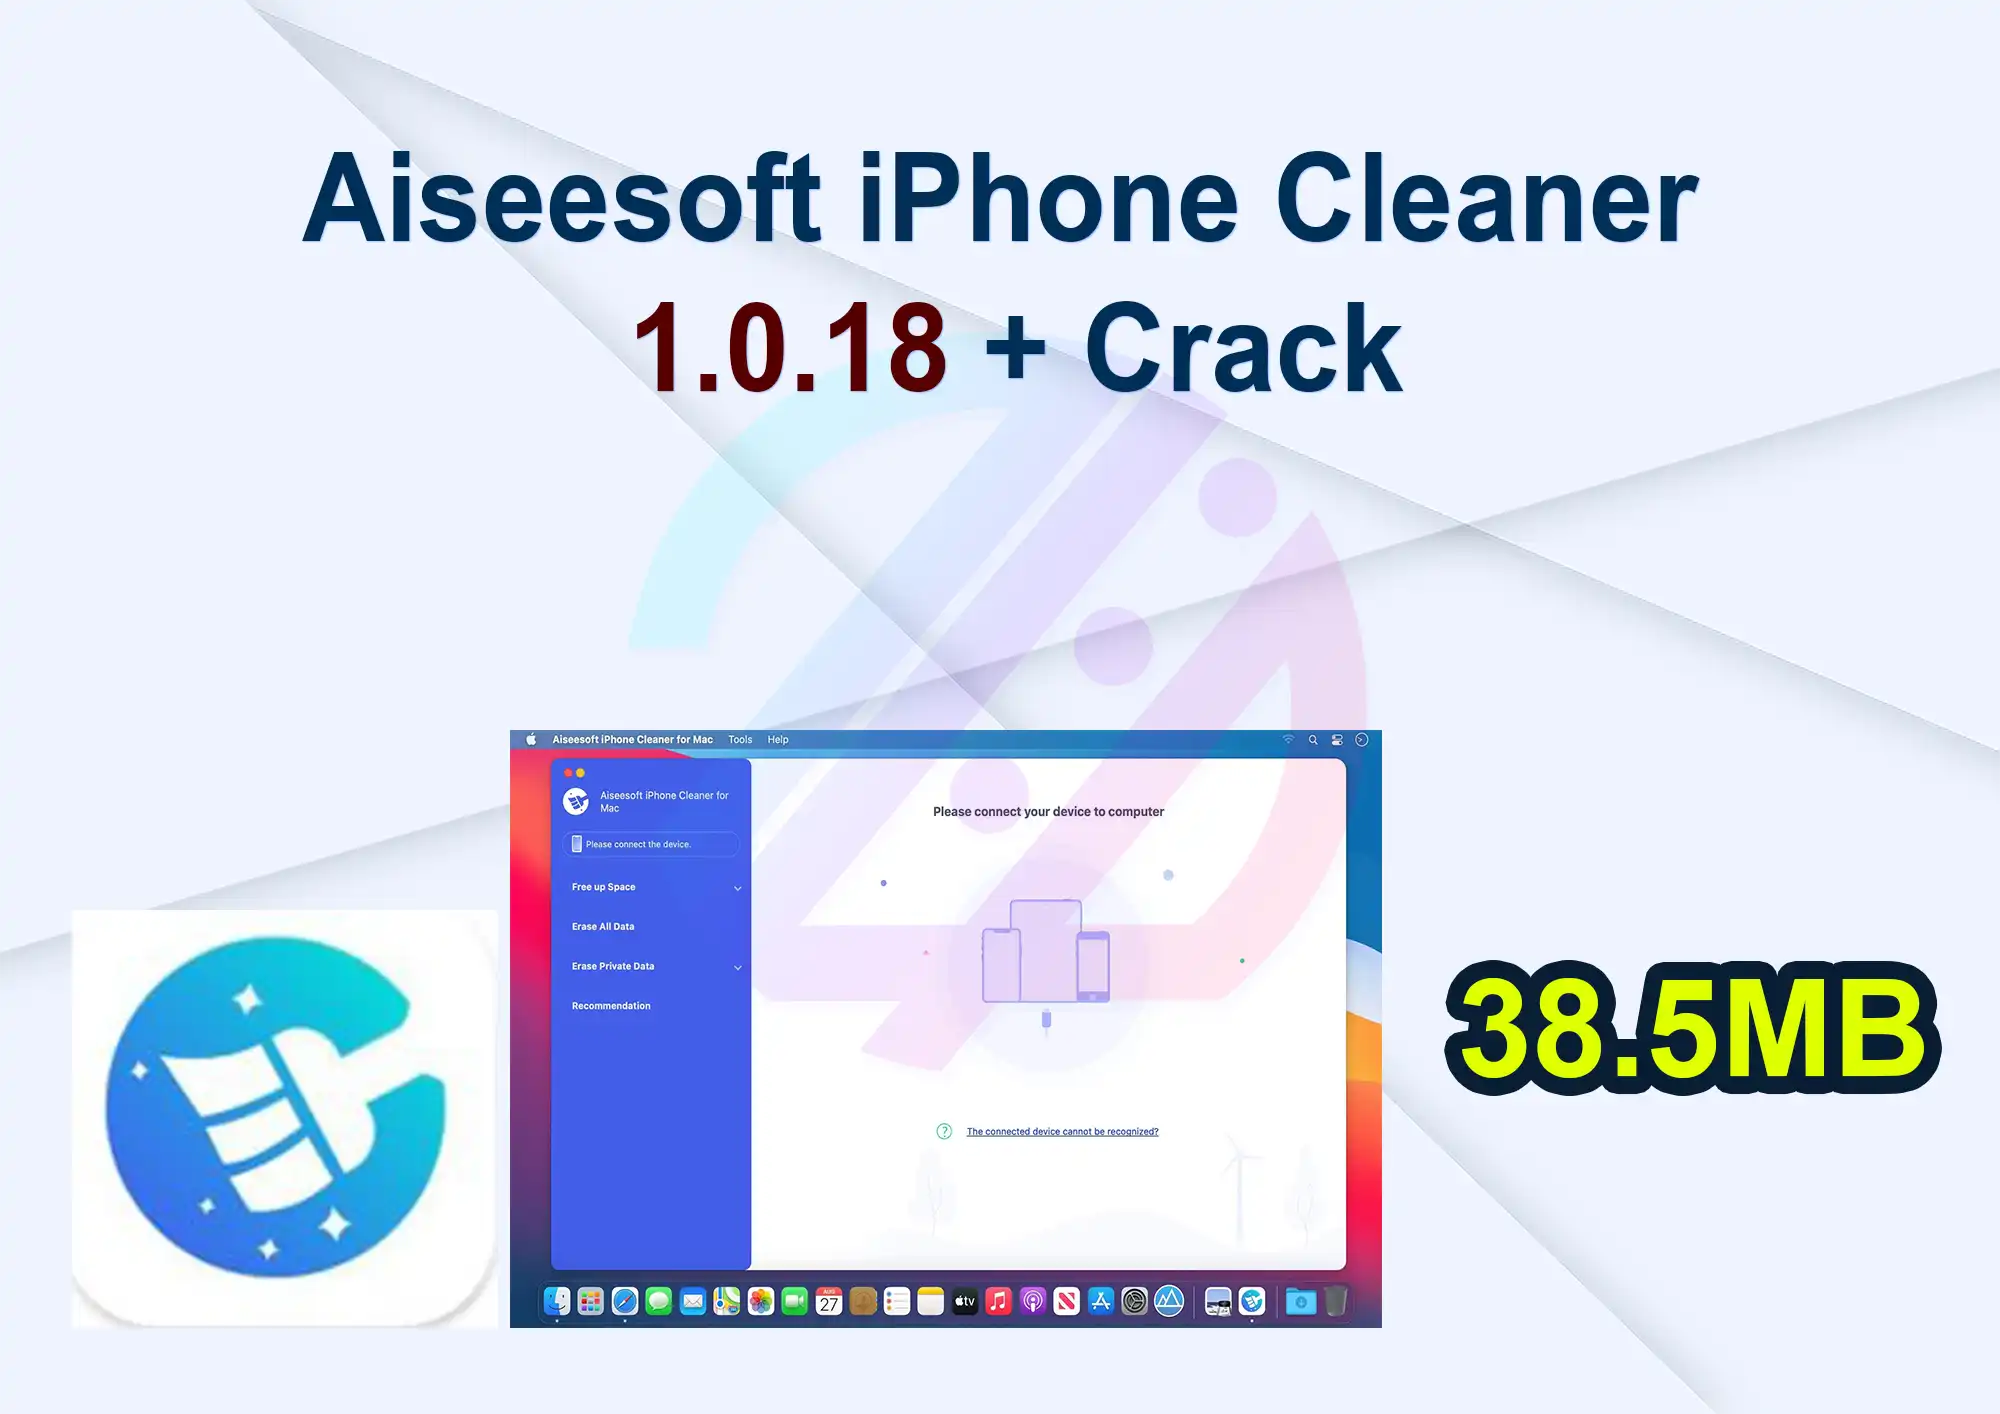 Aiseesoft iPhone Cleaner 1.0.18 + Crack